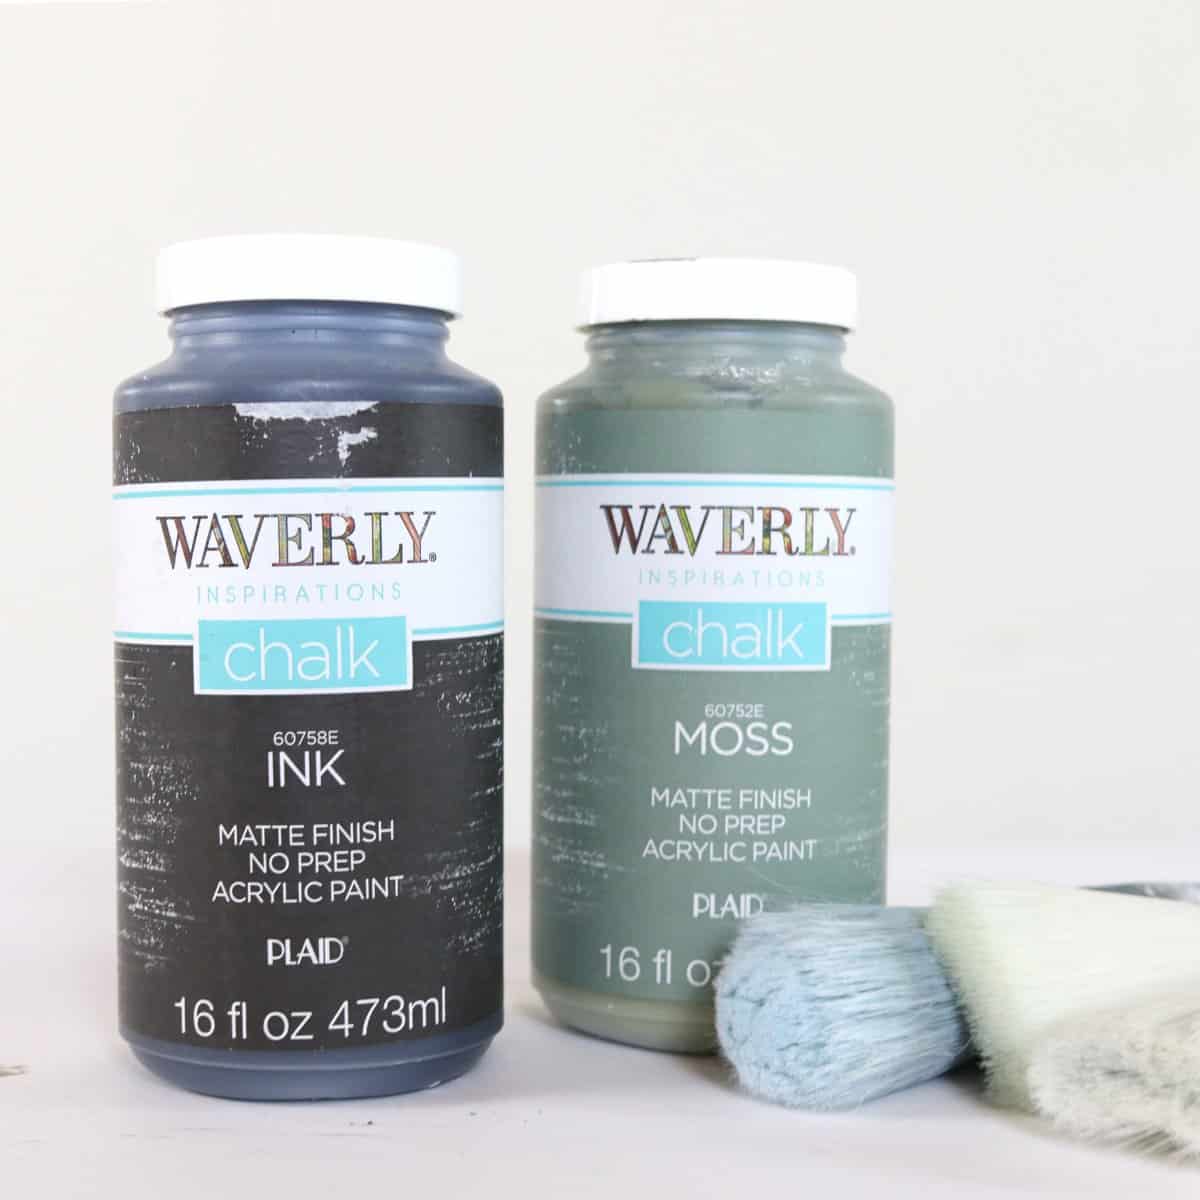 Waverly Chalk Paint: Everything You Need to Know